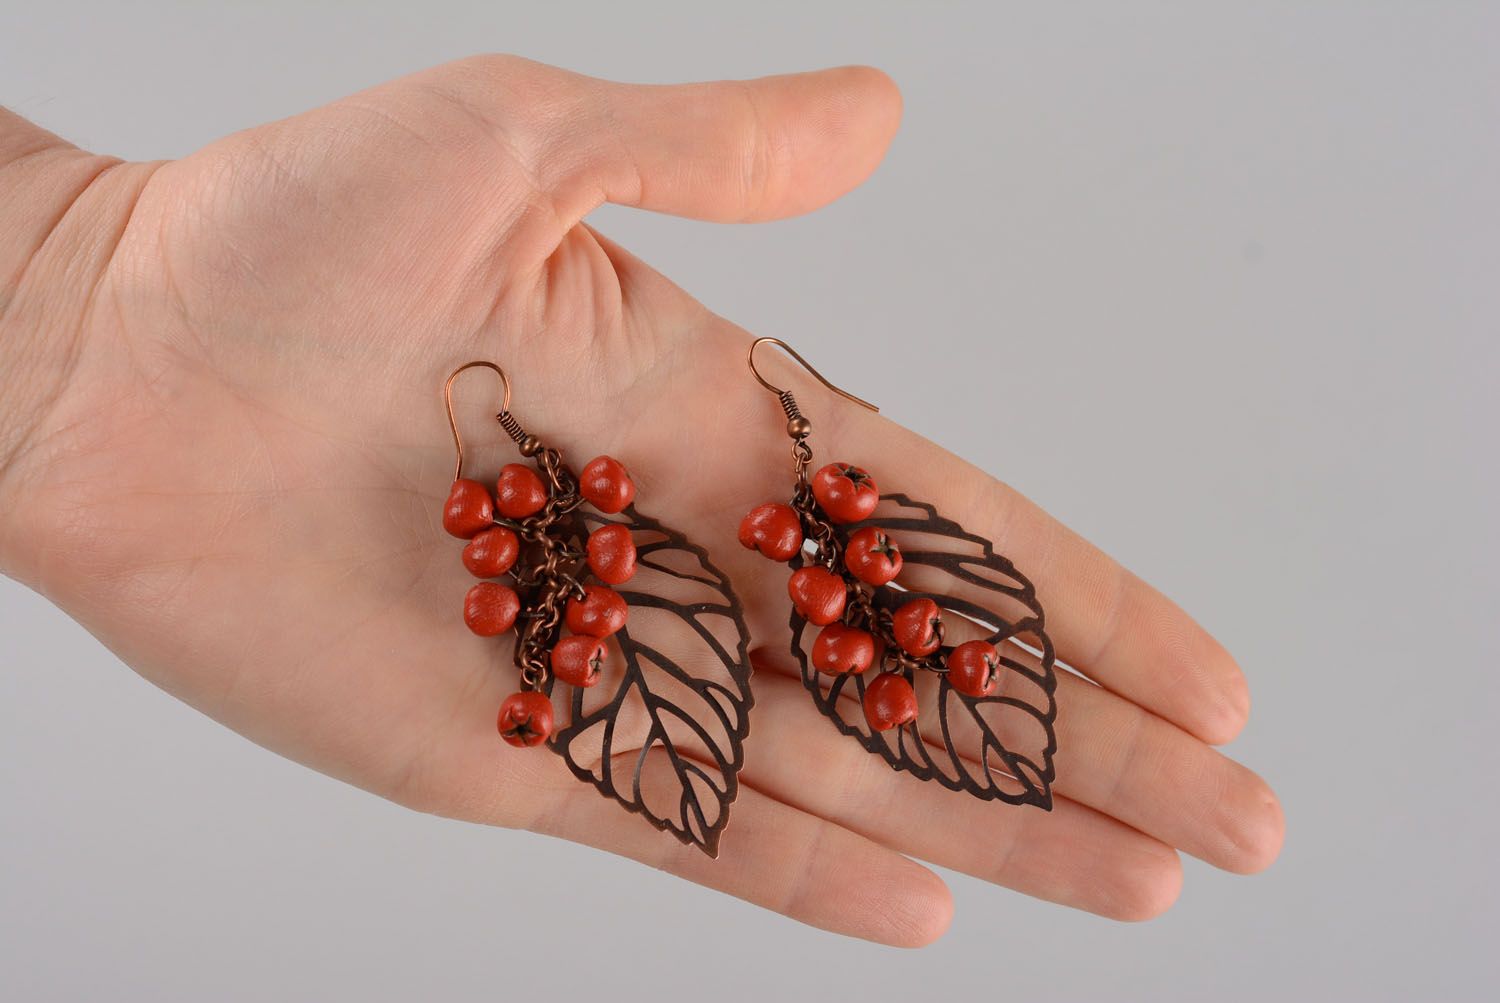 Homemade earrings with charms Mountain Ash Berries photo 5